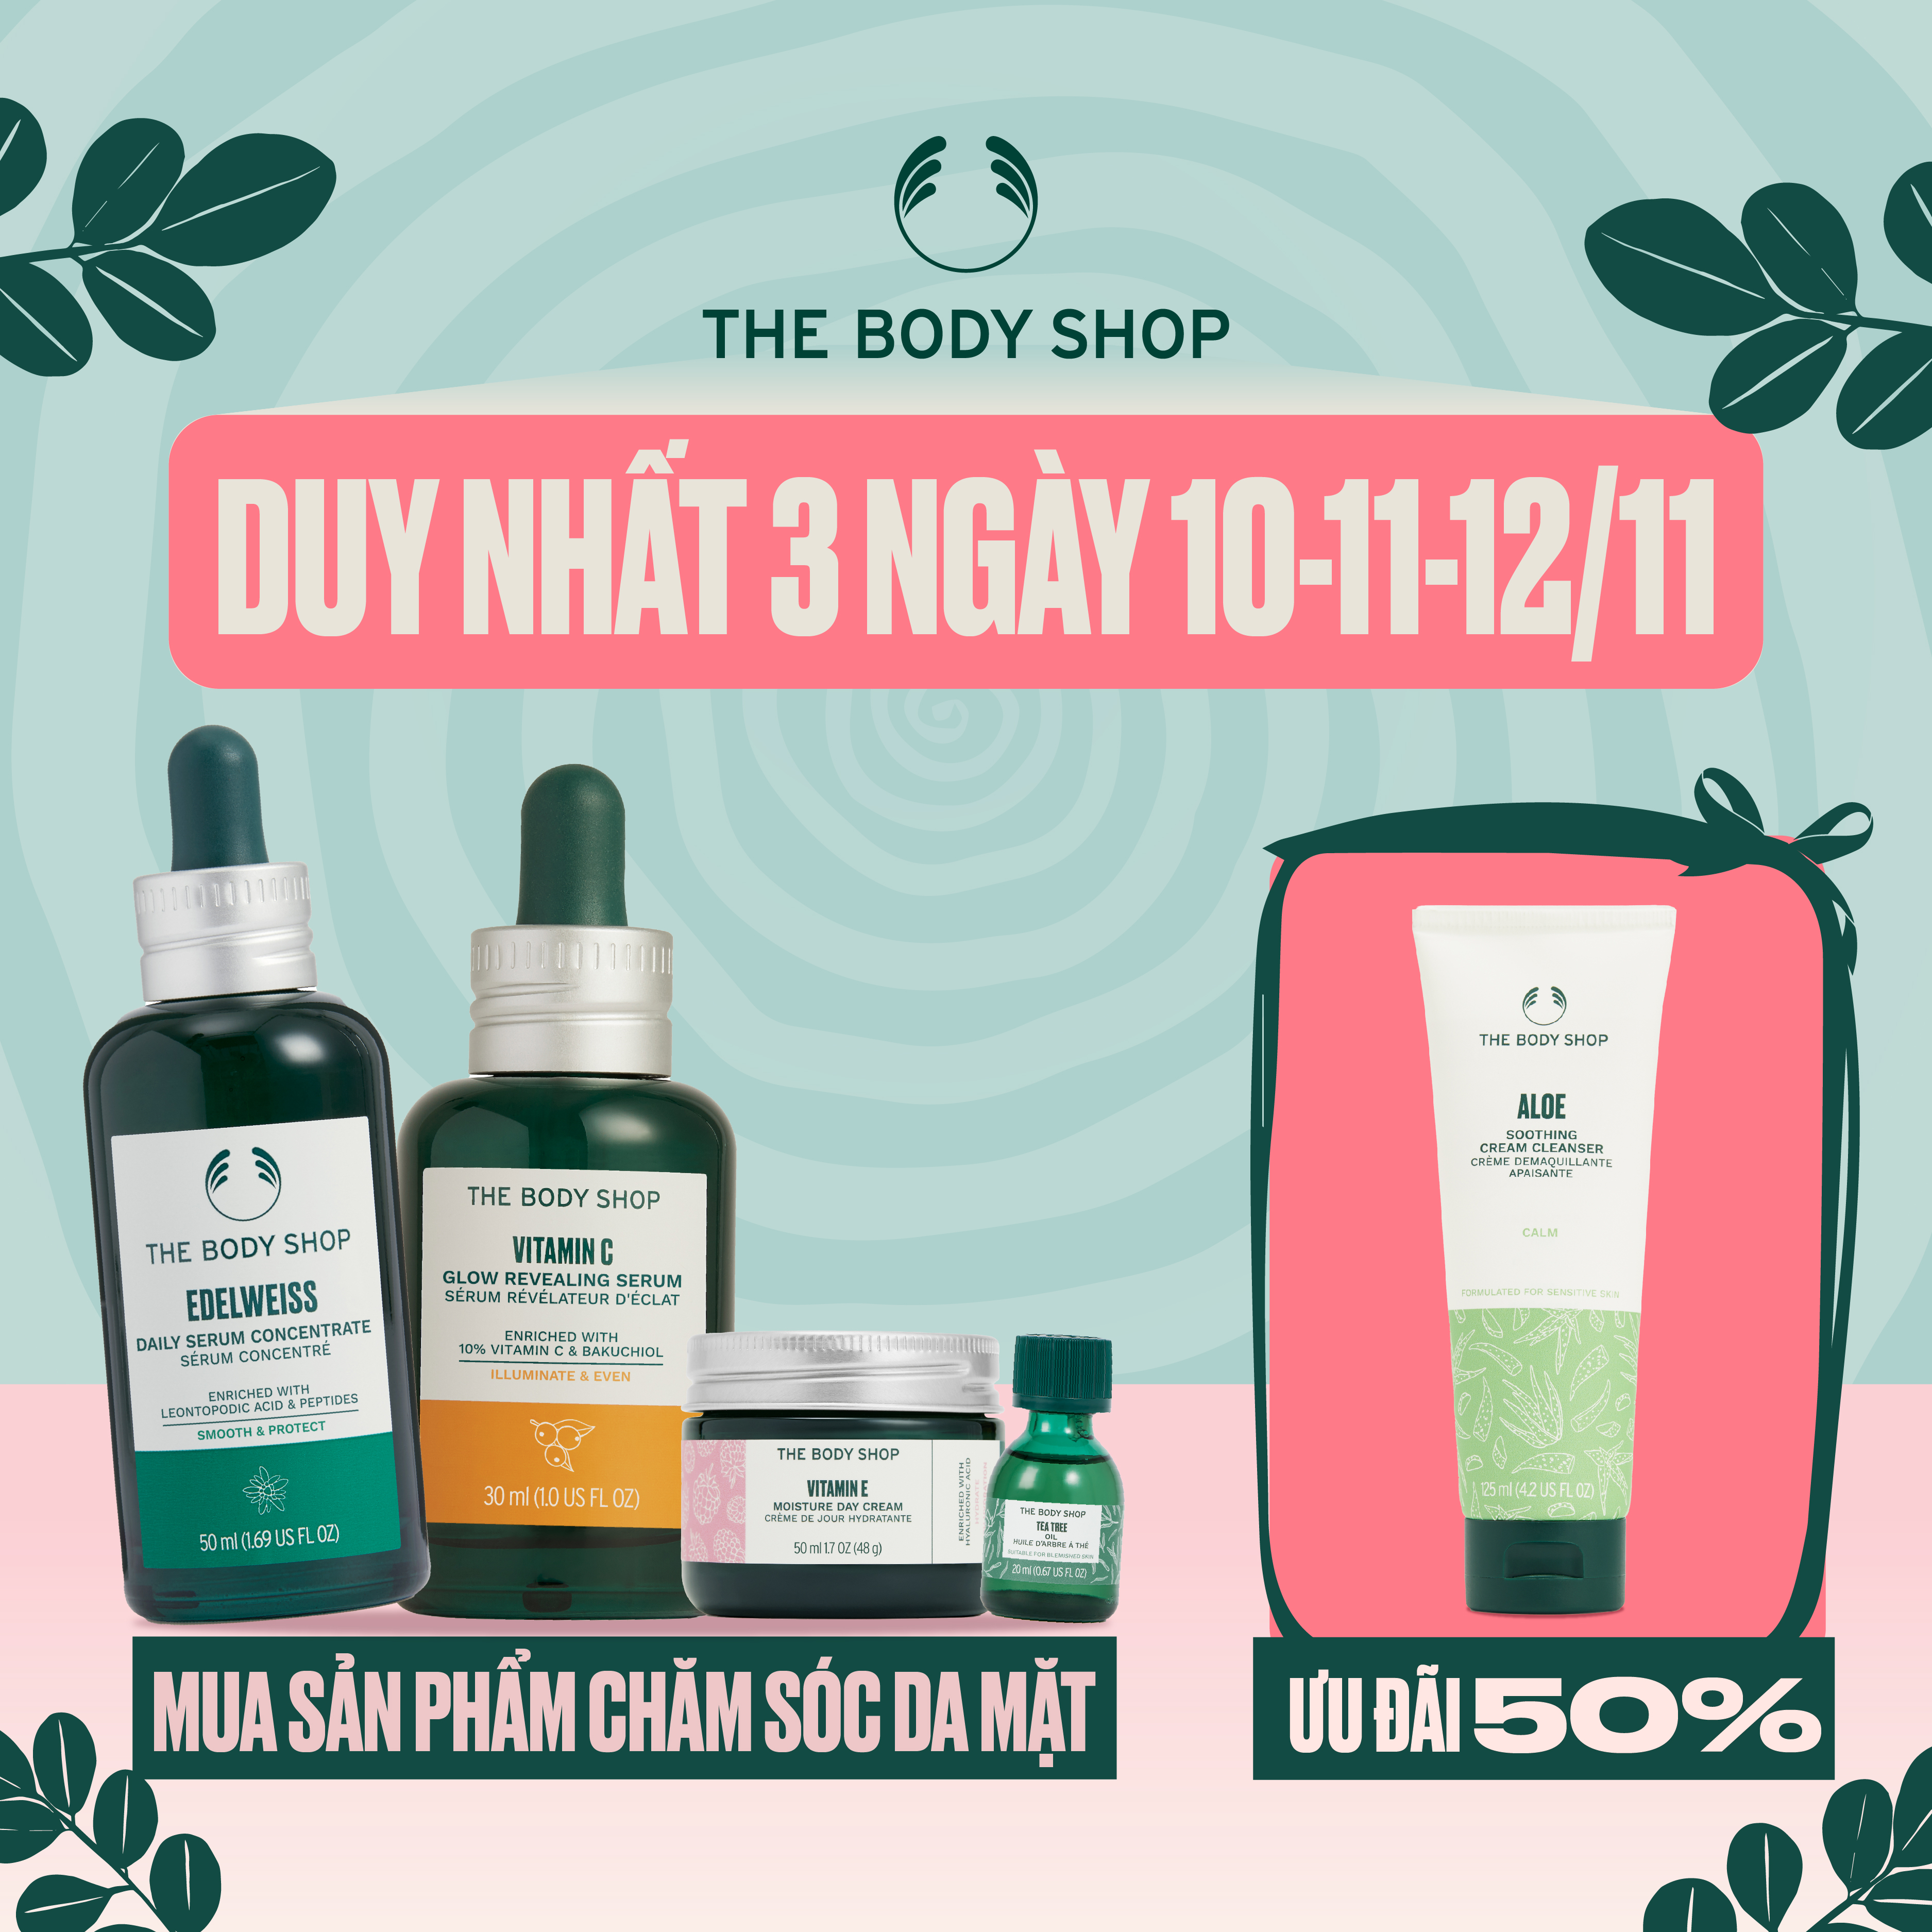 🔔LET’S HUNT JUICY DEALS ON DOUBLE DAY AT THE BODY SHOP!